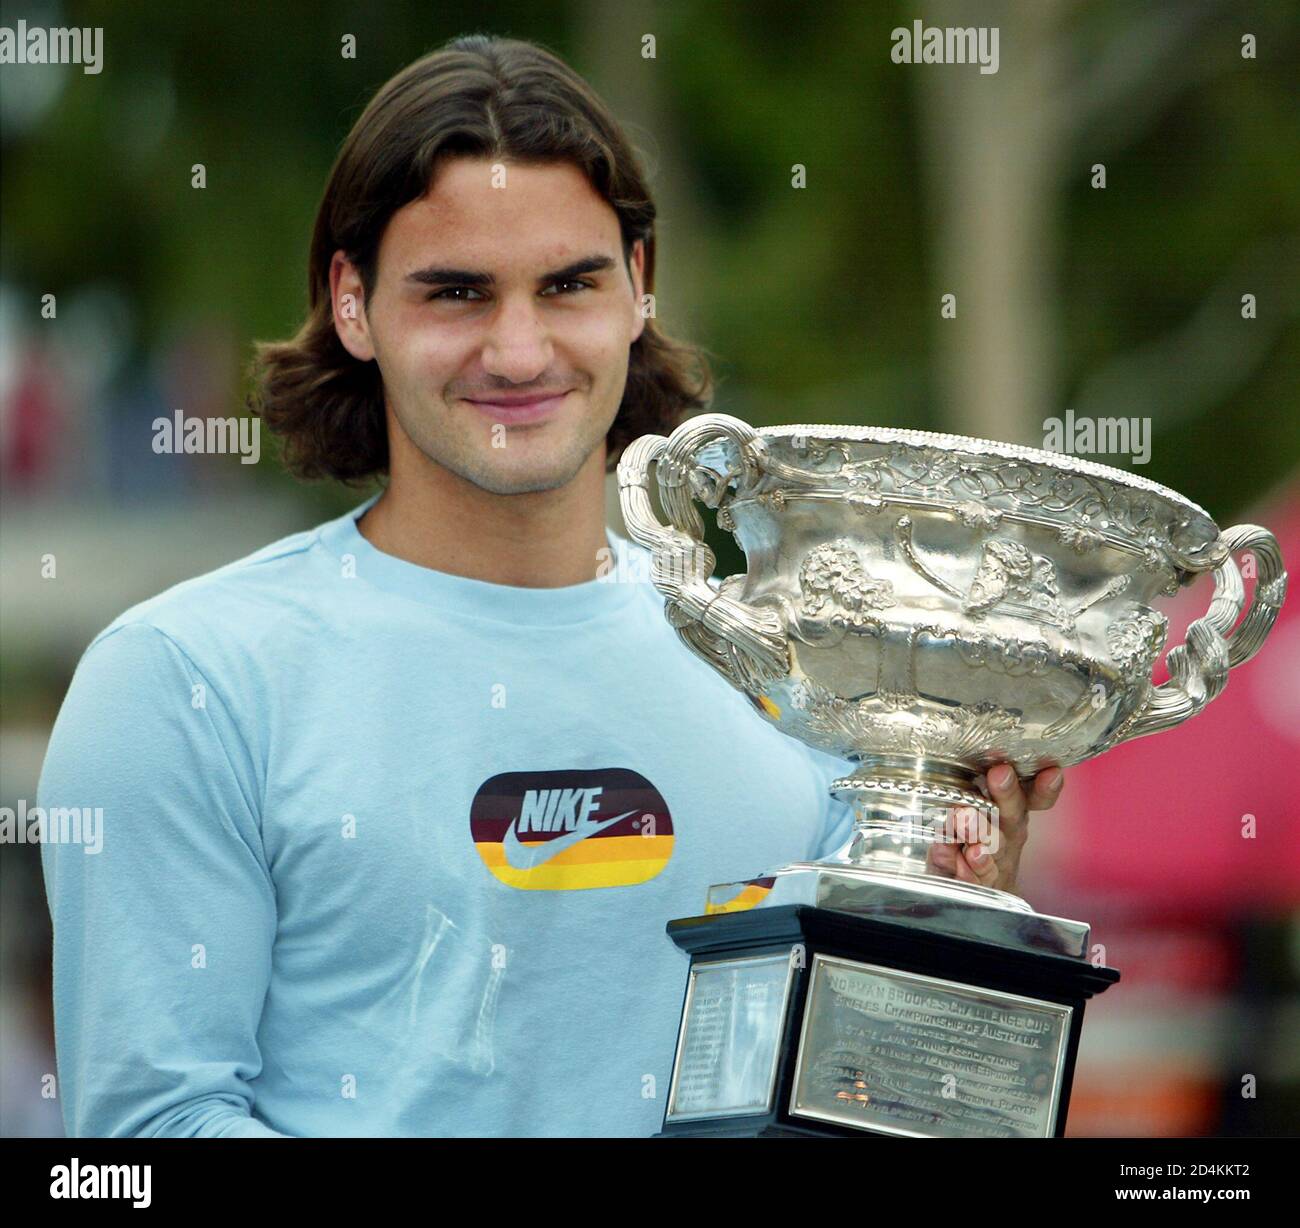 ROGER FEDERER OF SWITZERLAND POSES WITH THE TROPHY AFTER WINNING THE  AUSTRALIAN OPEN TENNIS CHAMPIONSHIP. Roger Federer of Switzerland poses for  photographers with the trophy after he beat Russia's Marat Safin in